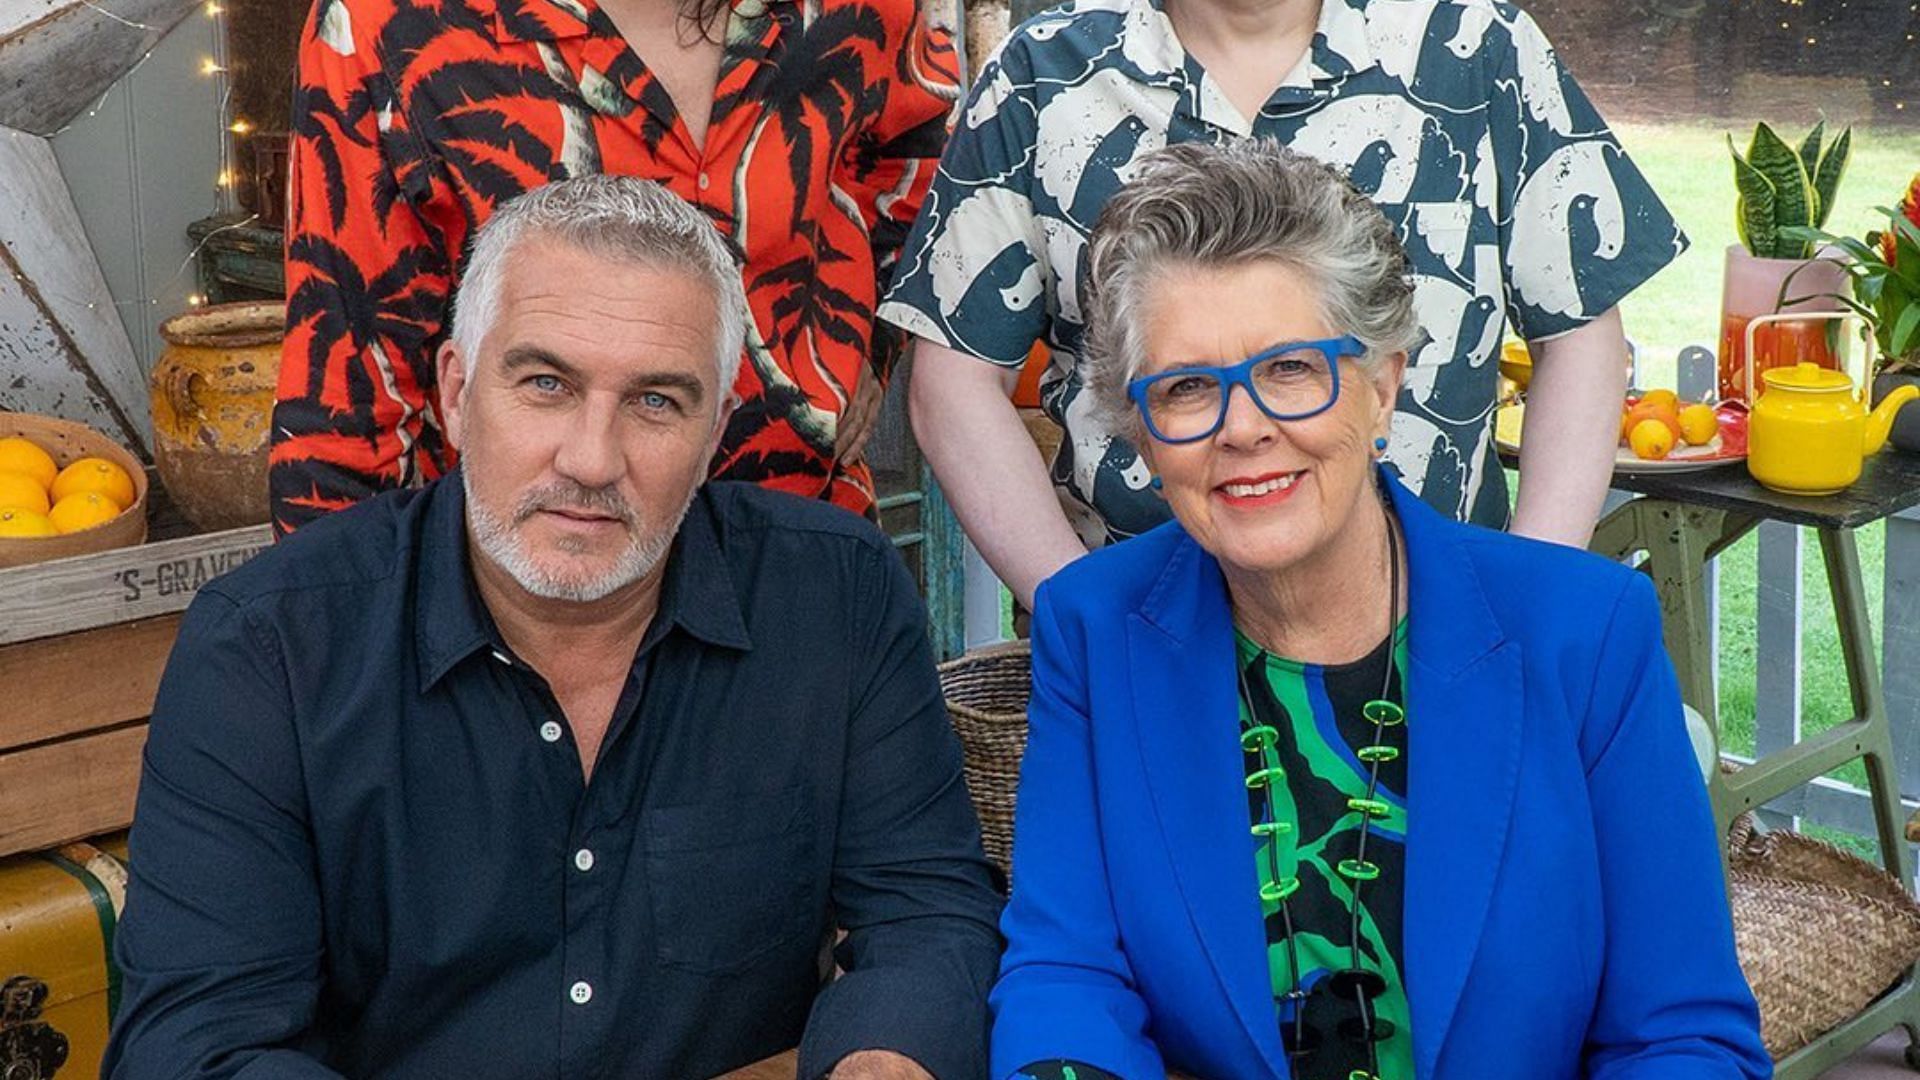 Paul Hollywood and Prue Leith set to judge The Great British Baking Show Season 10